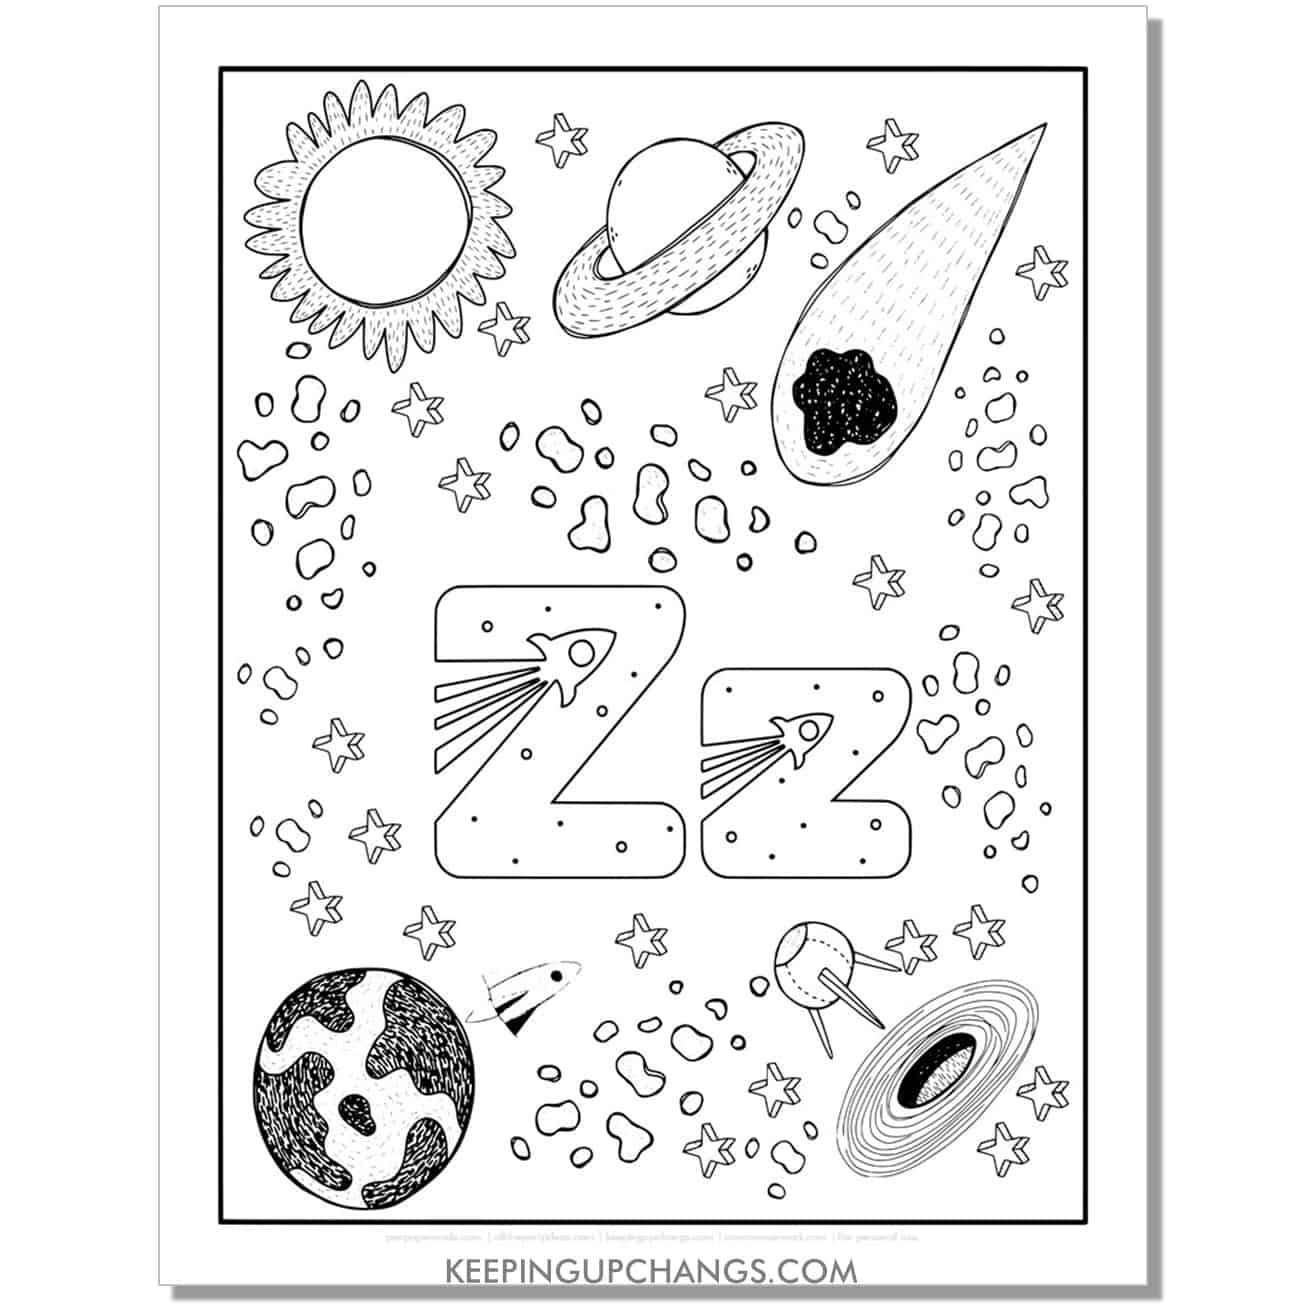 free alphabet letter z coloring page for kids with rockets, space theme.